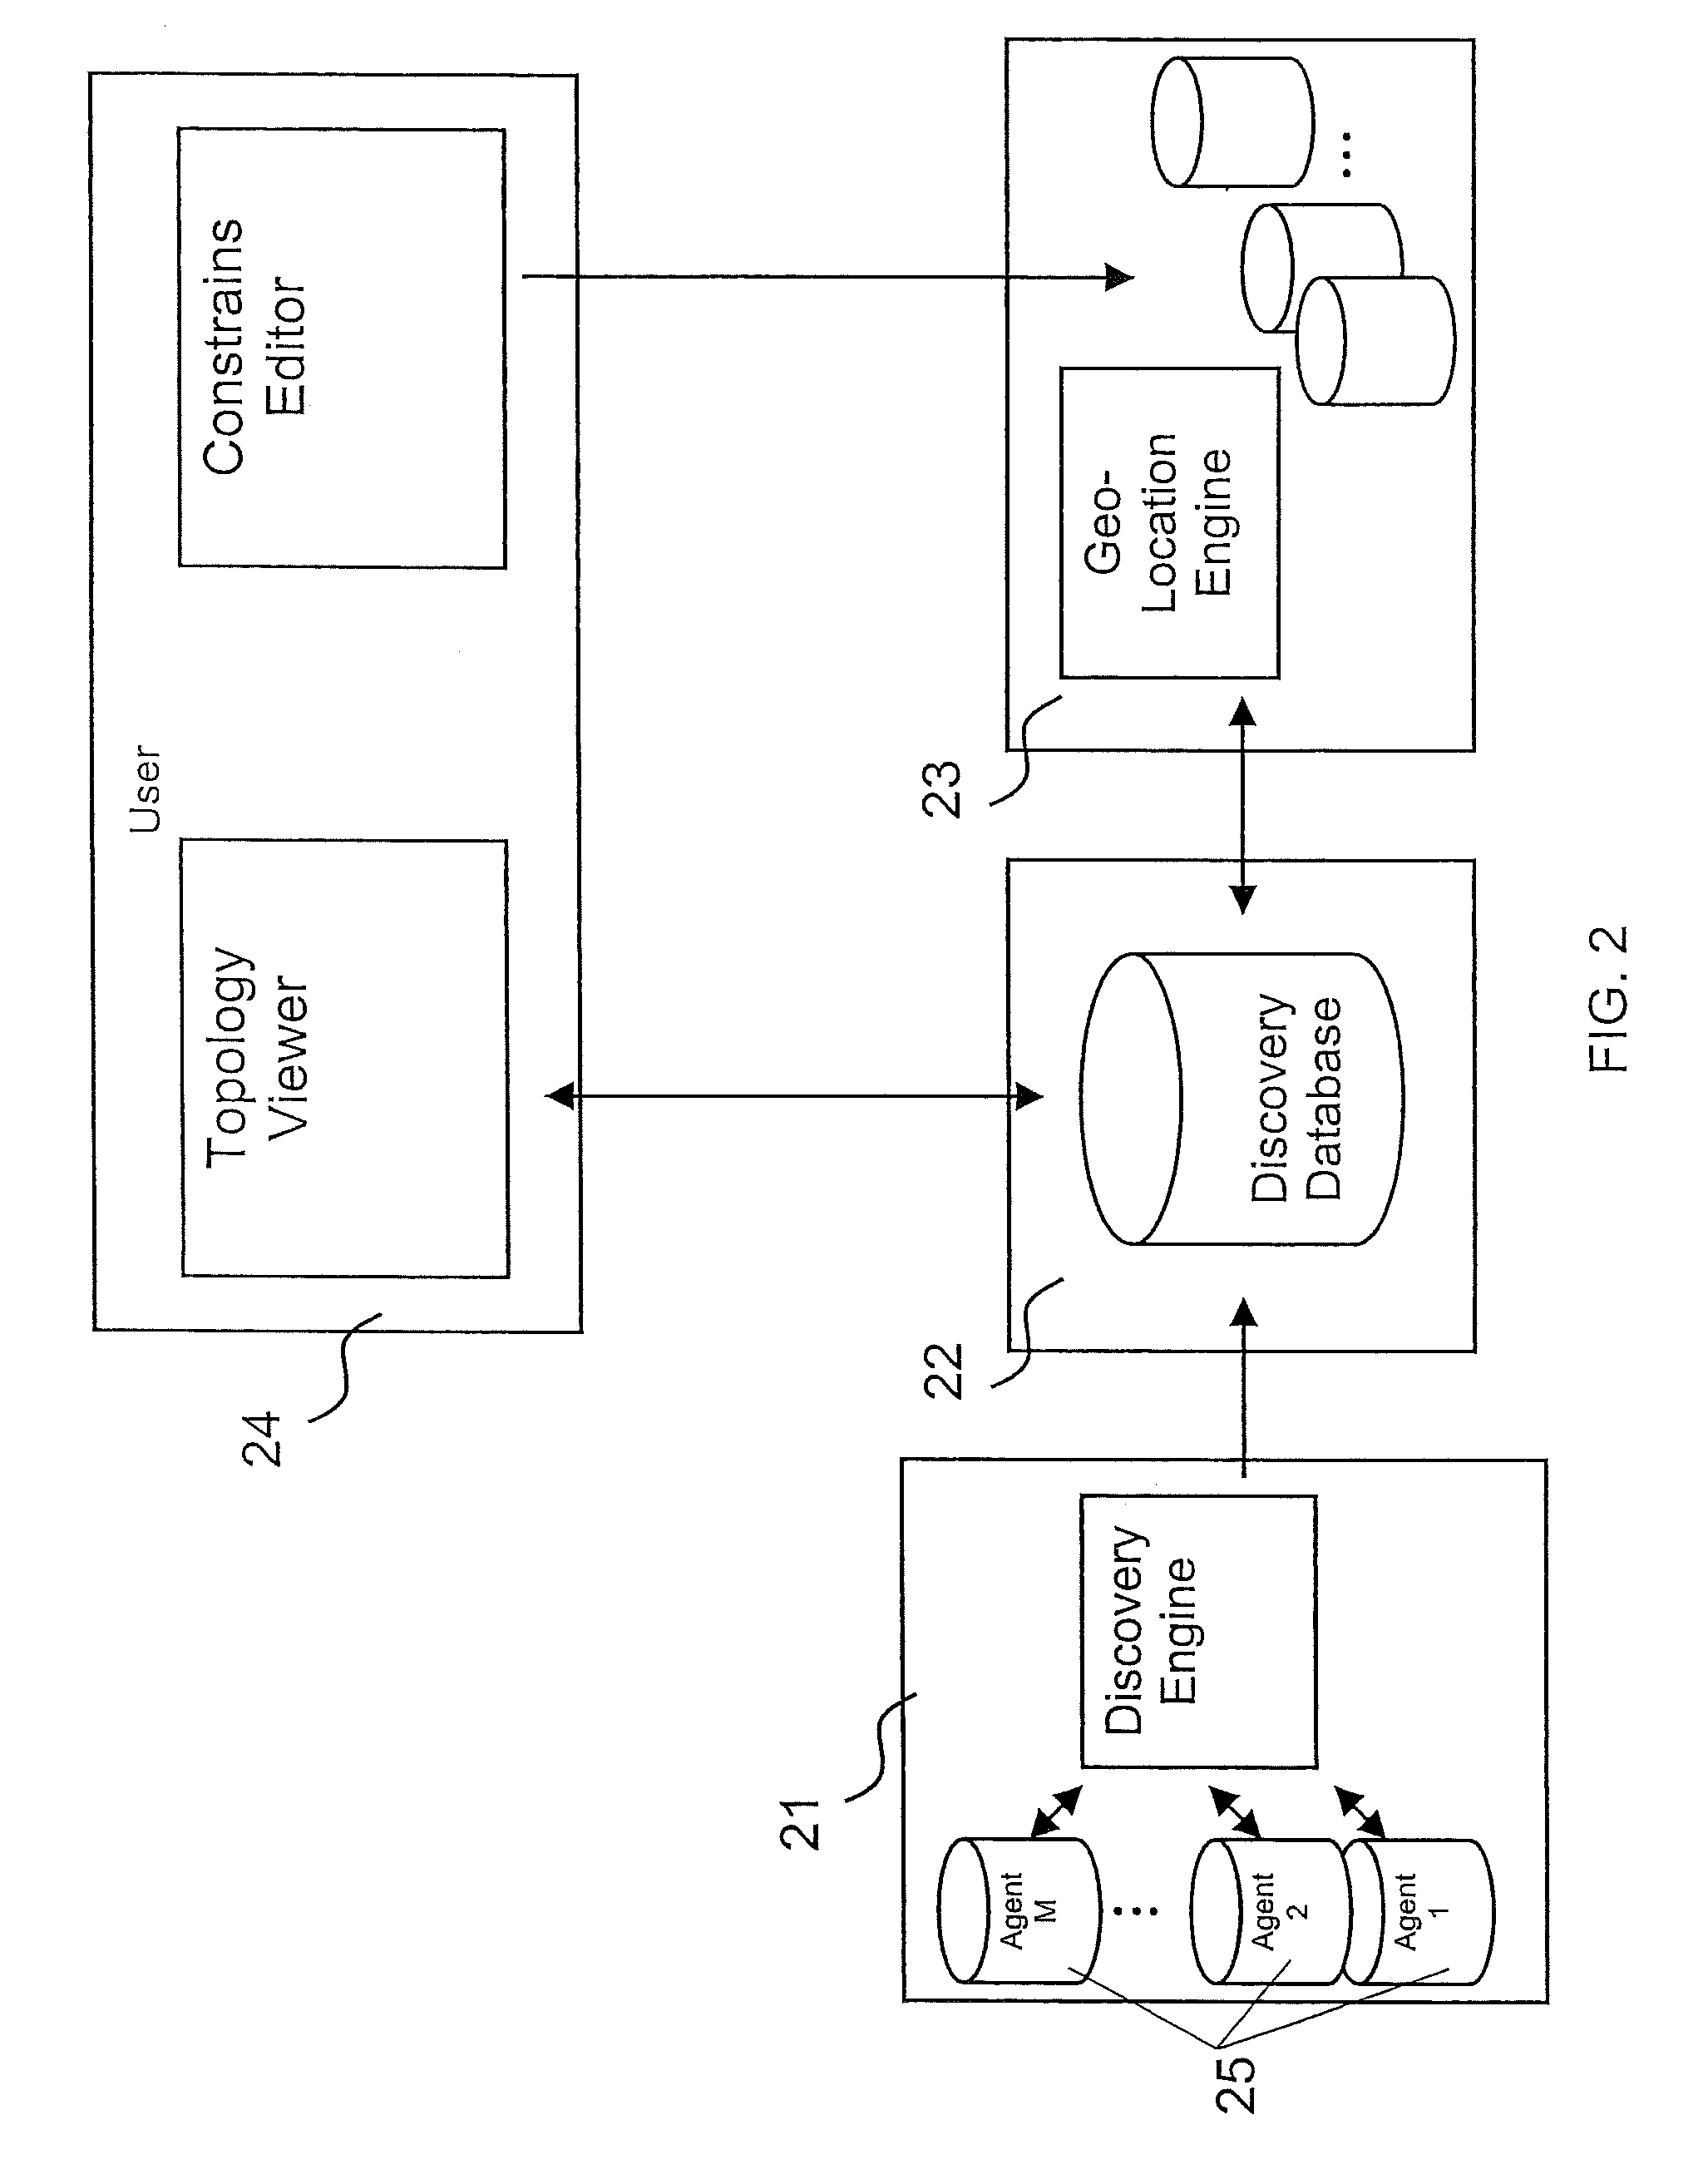 System and method for estimating the geographical location and proximity of network devices and their directly connected neighbors